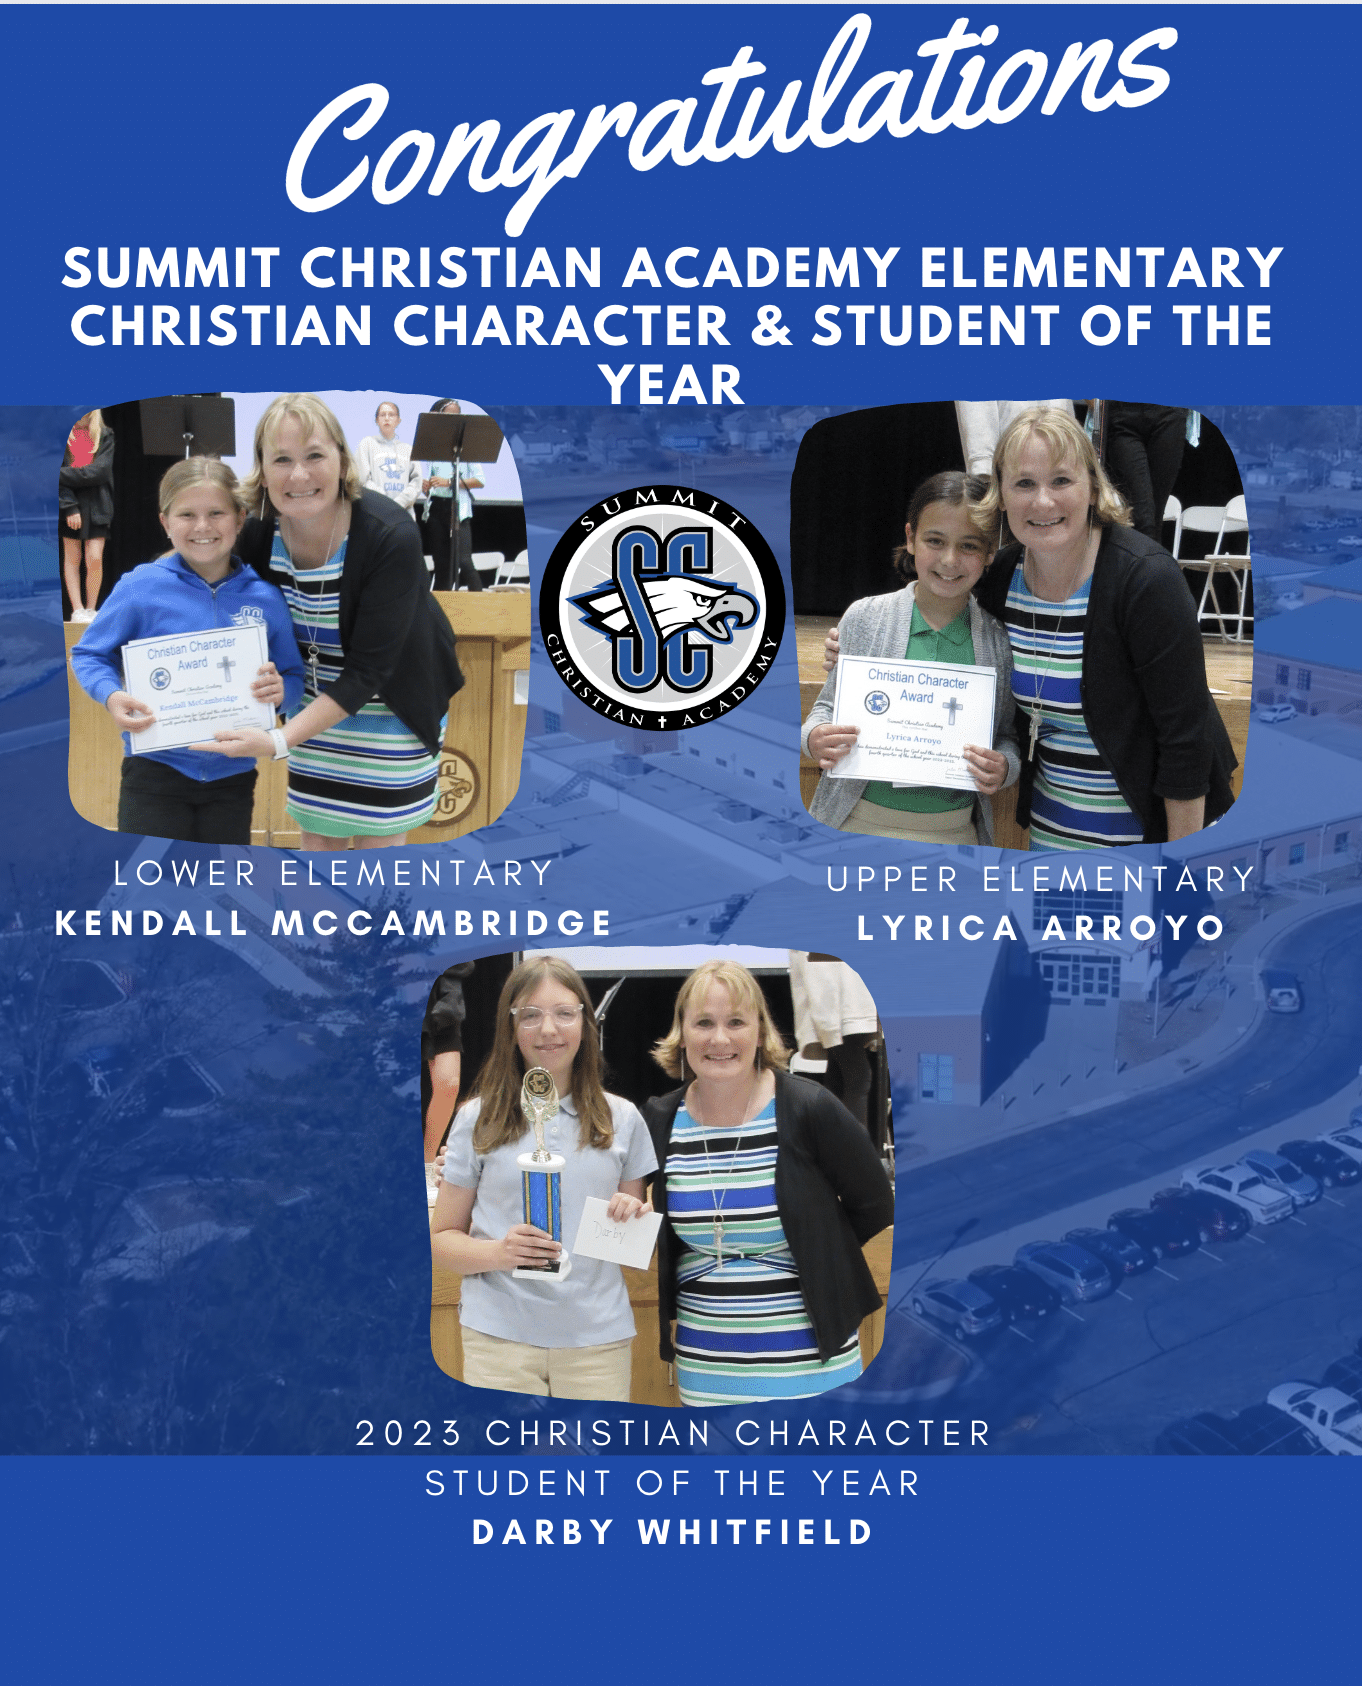 Summit Christian Academy Announces Elementary Christian Character Recipients and Christian Character Student of the Year